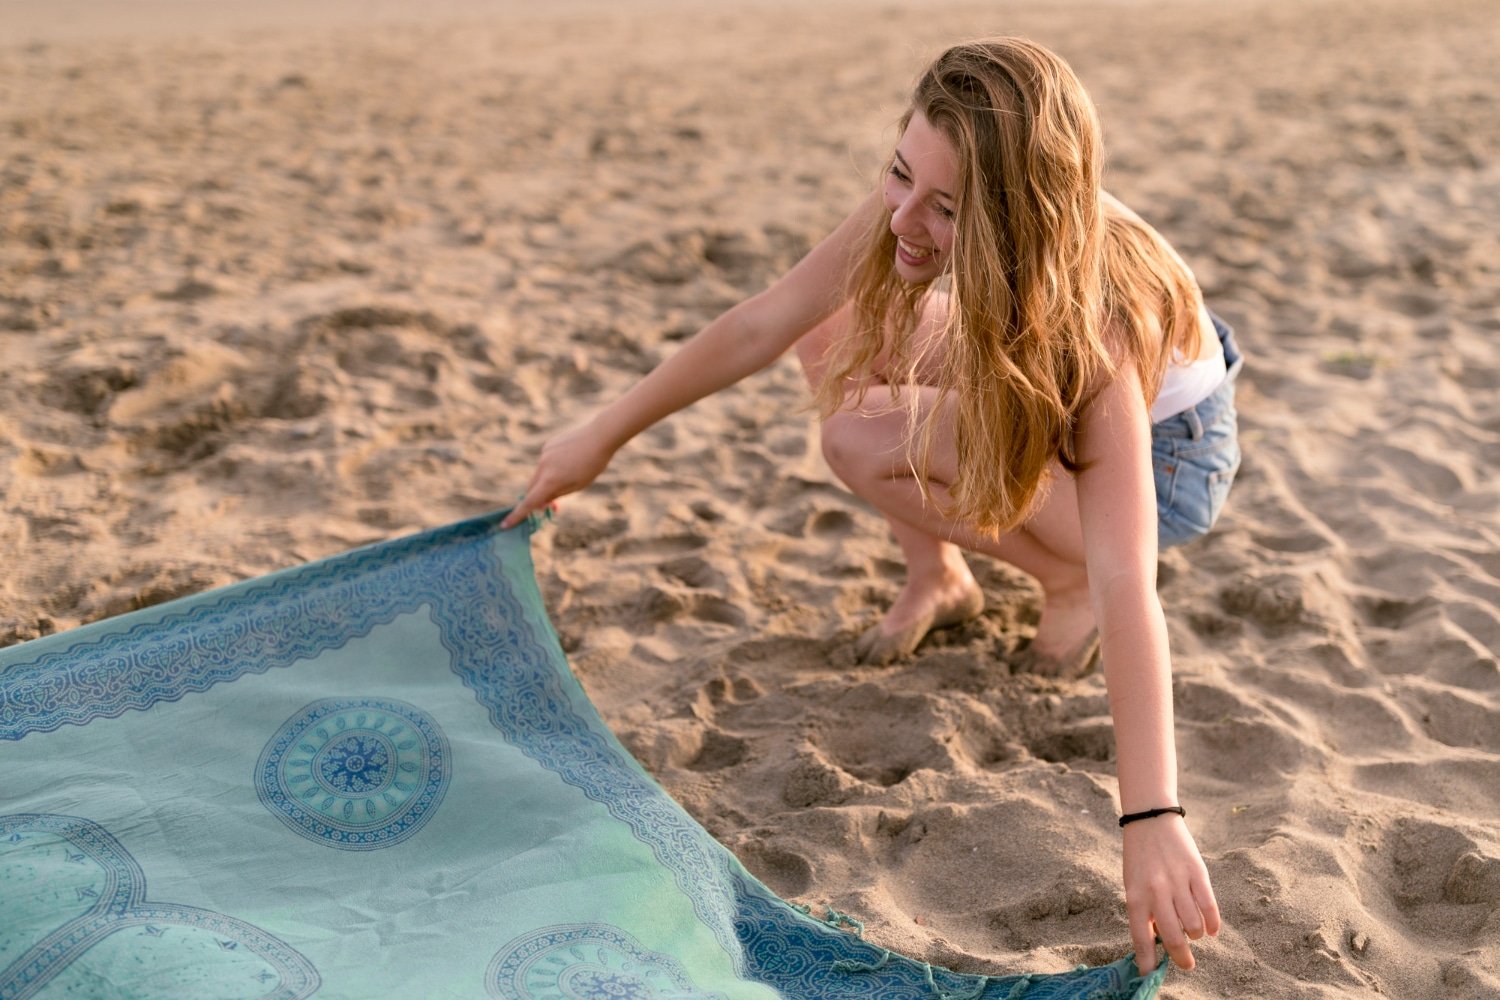 Support Ocean Conservation With Sand Cloud’s Eco-Friendly Towels